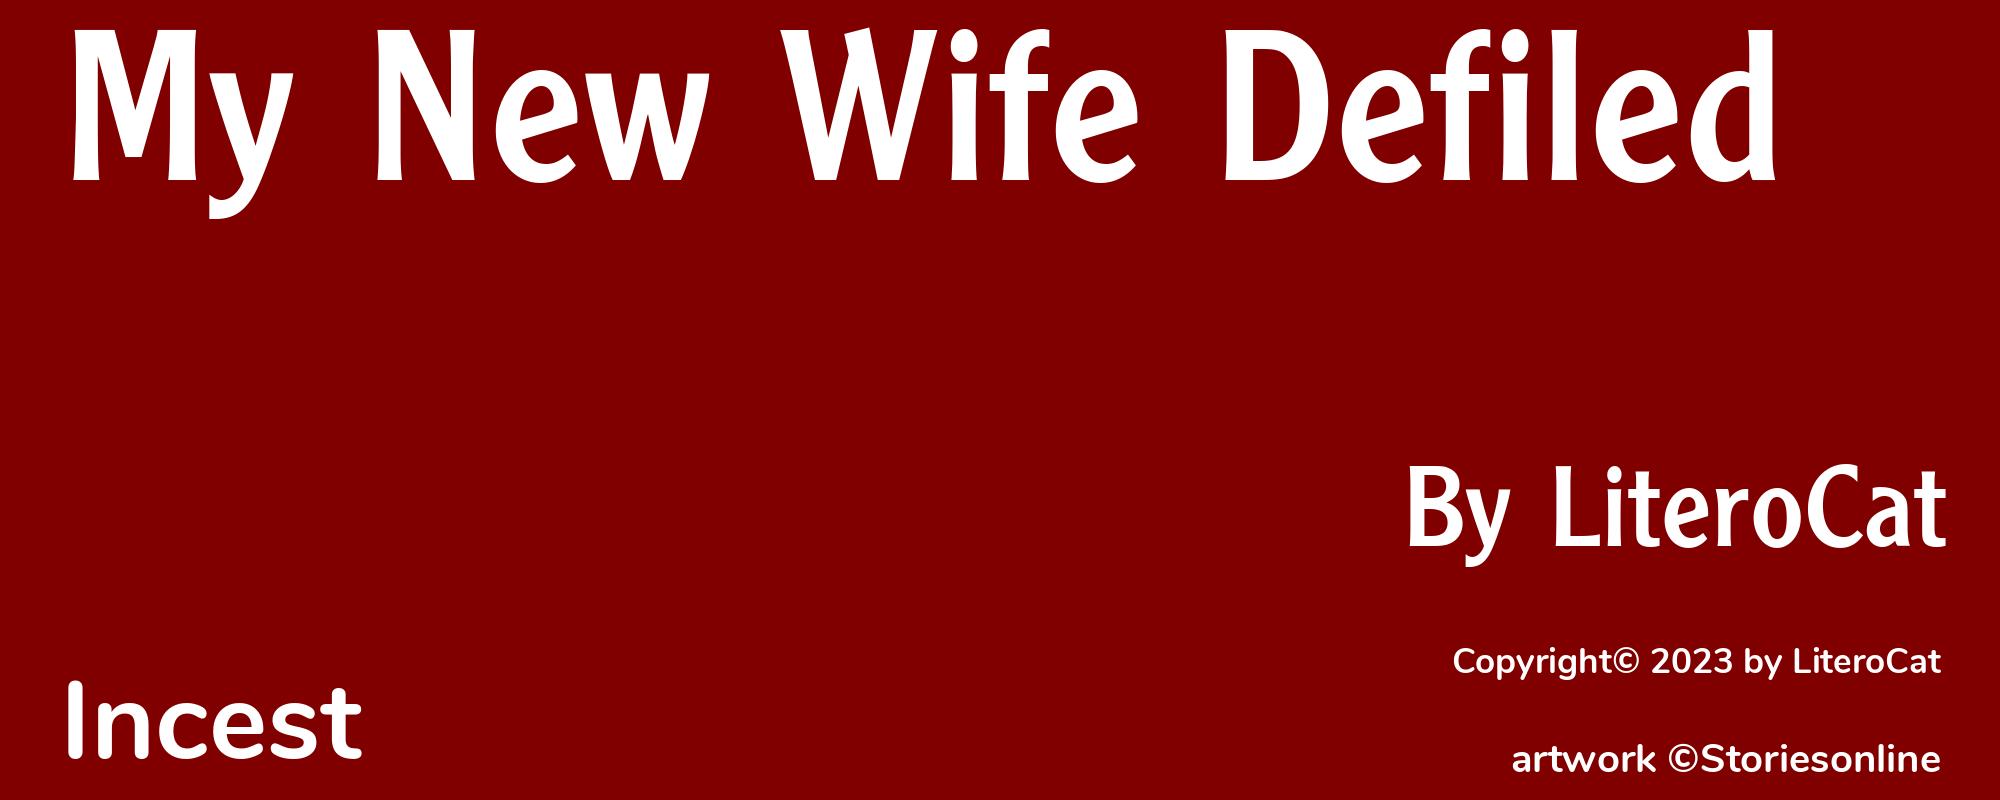 My New Wife Defiled - Cover